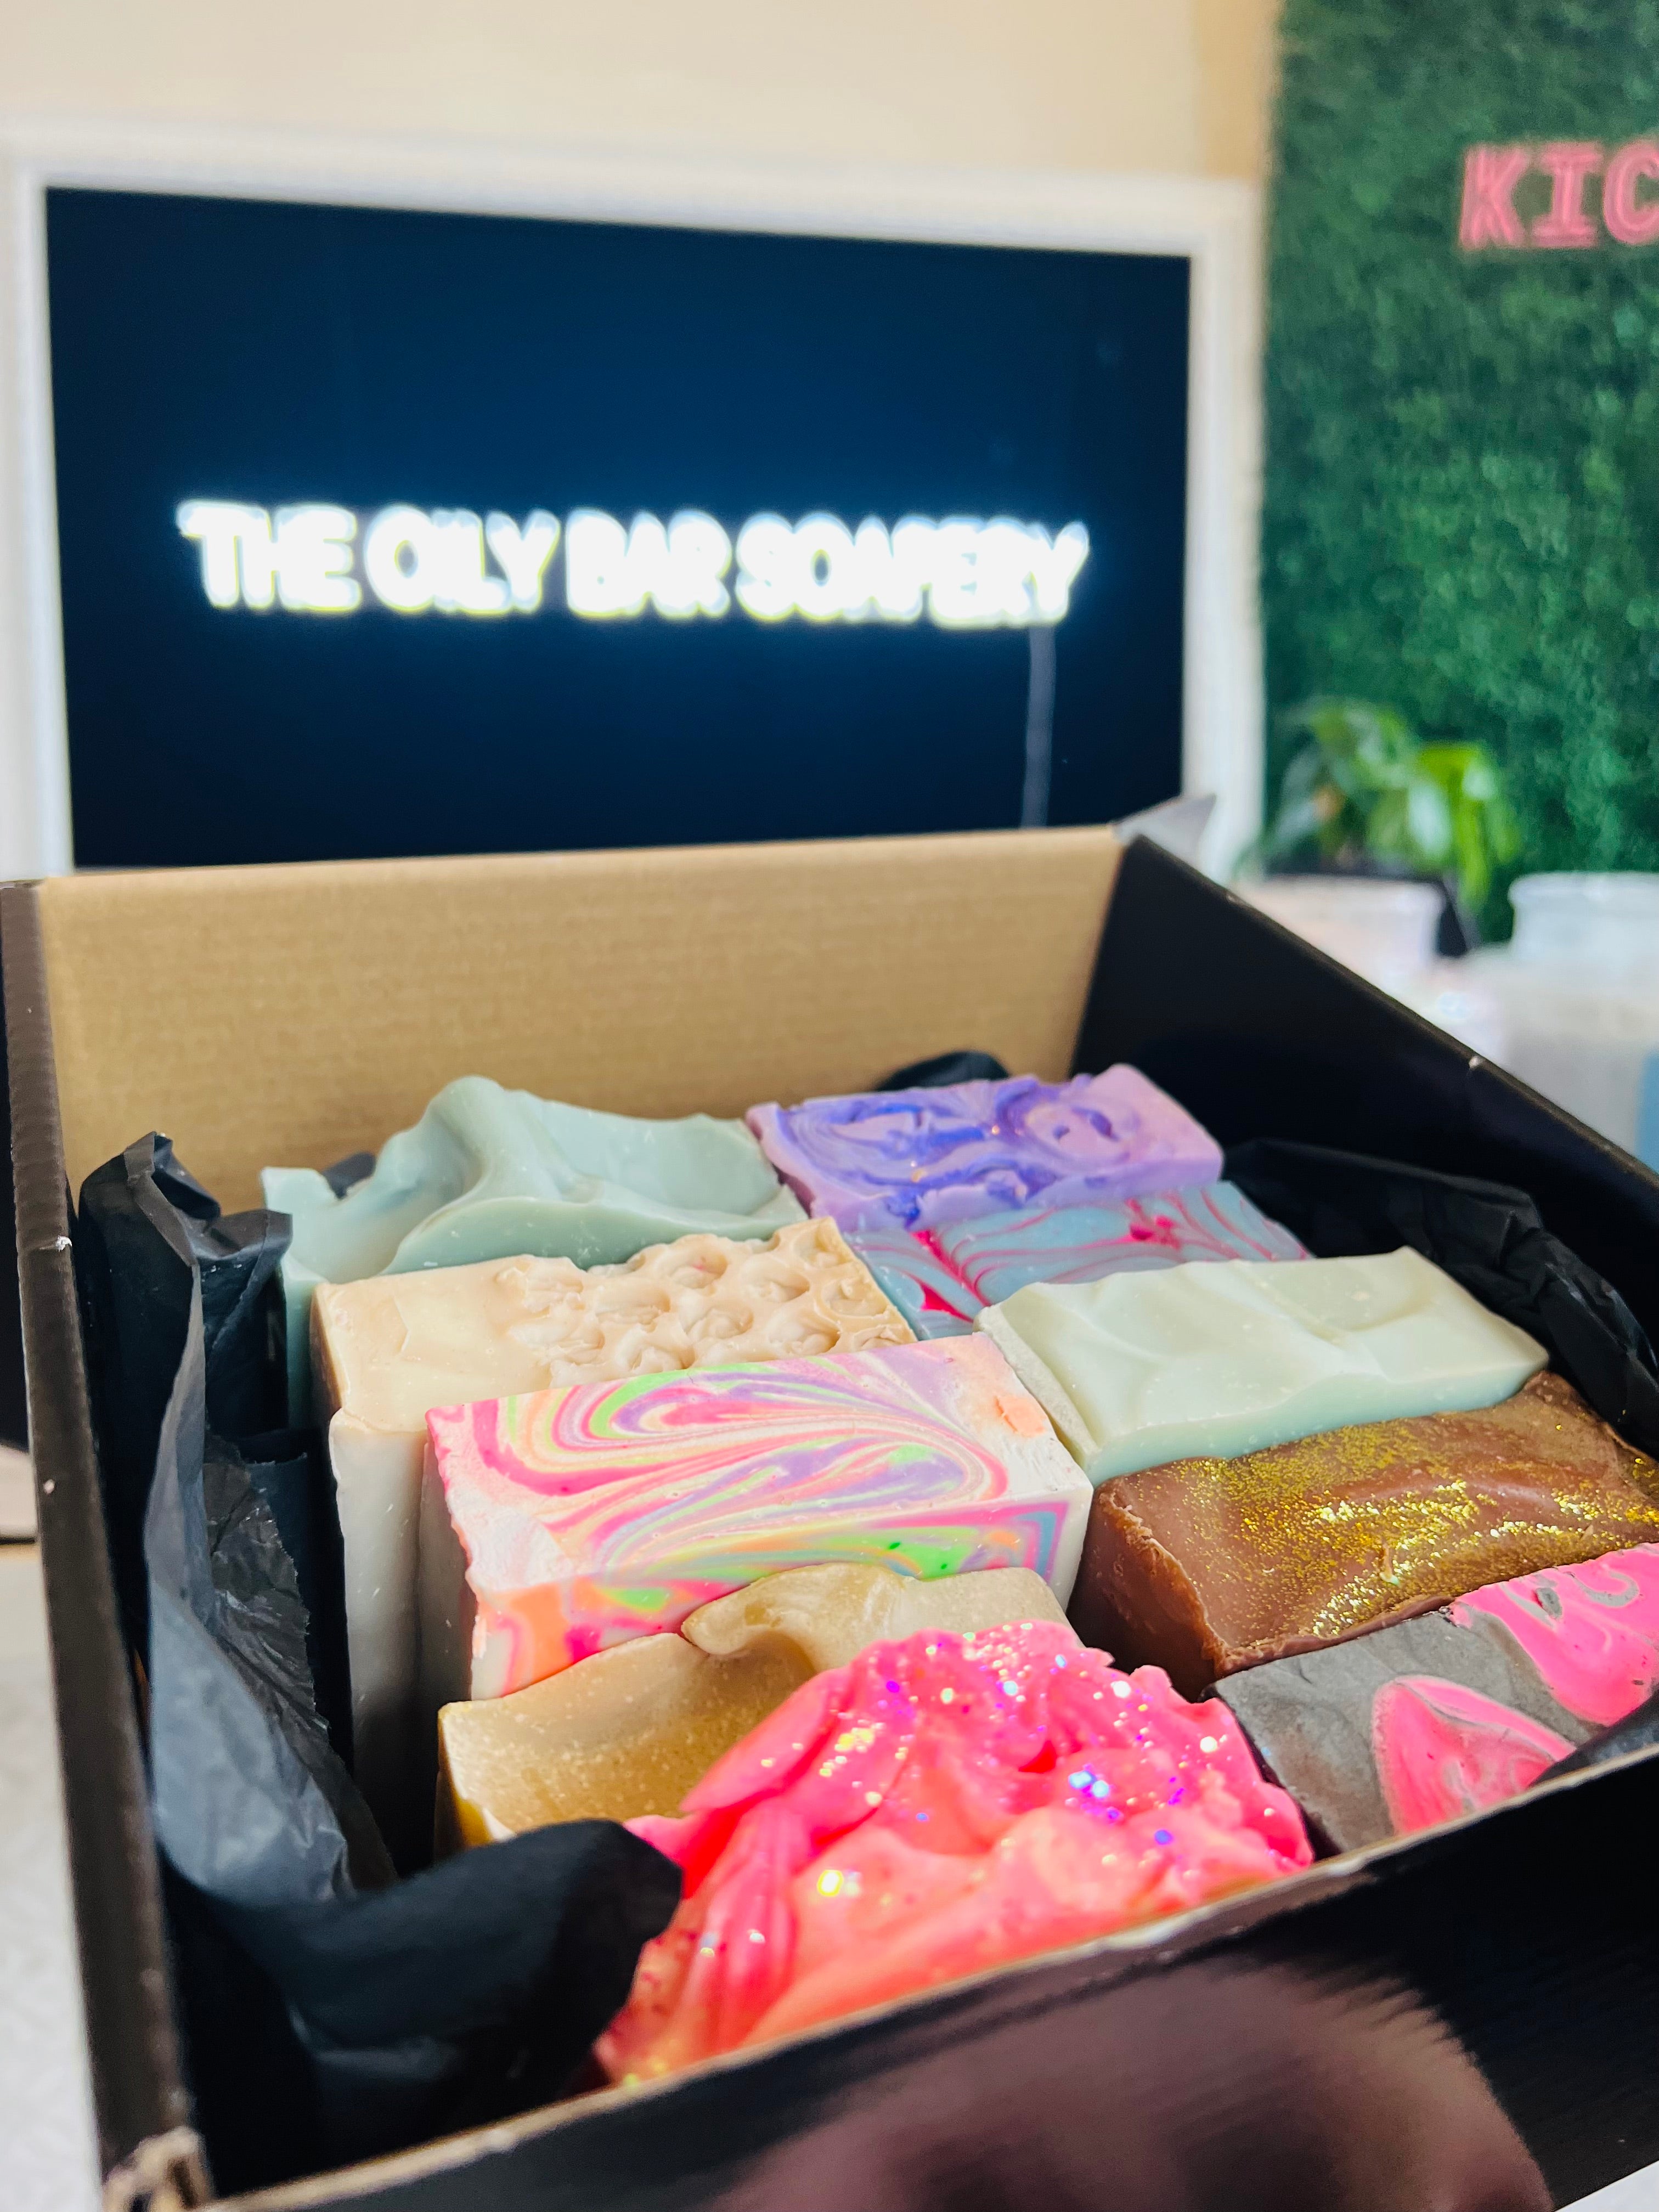 The Soap Box – The Oily Bar Soapery